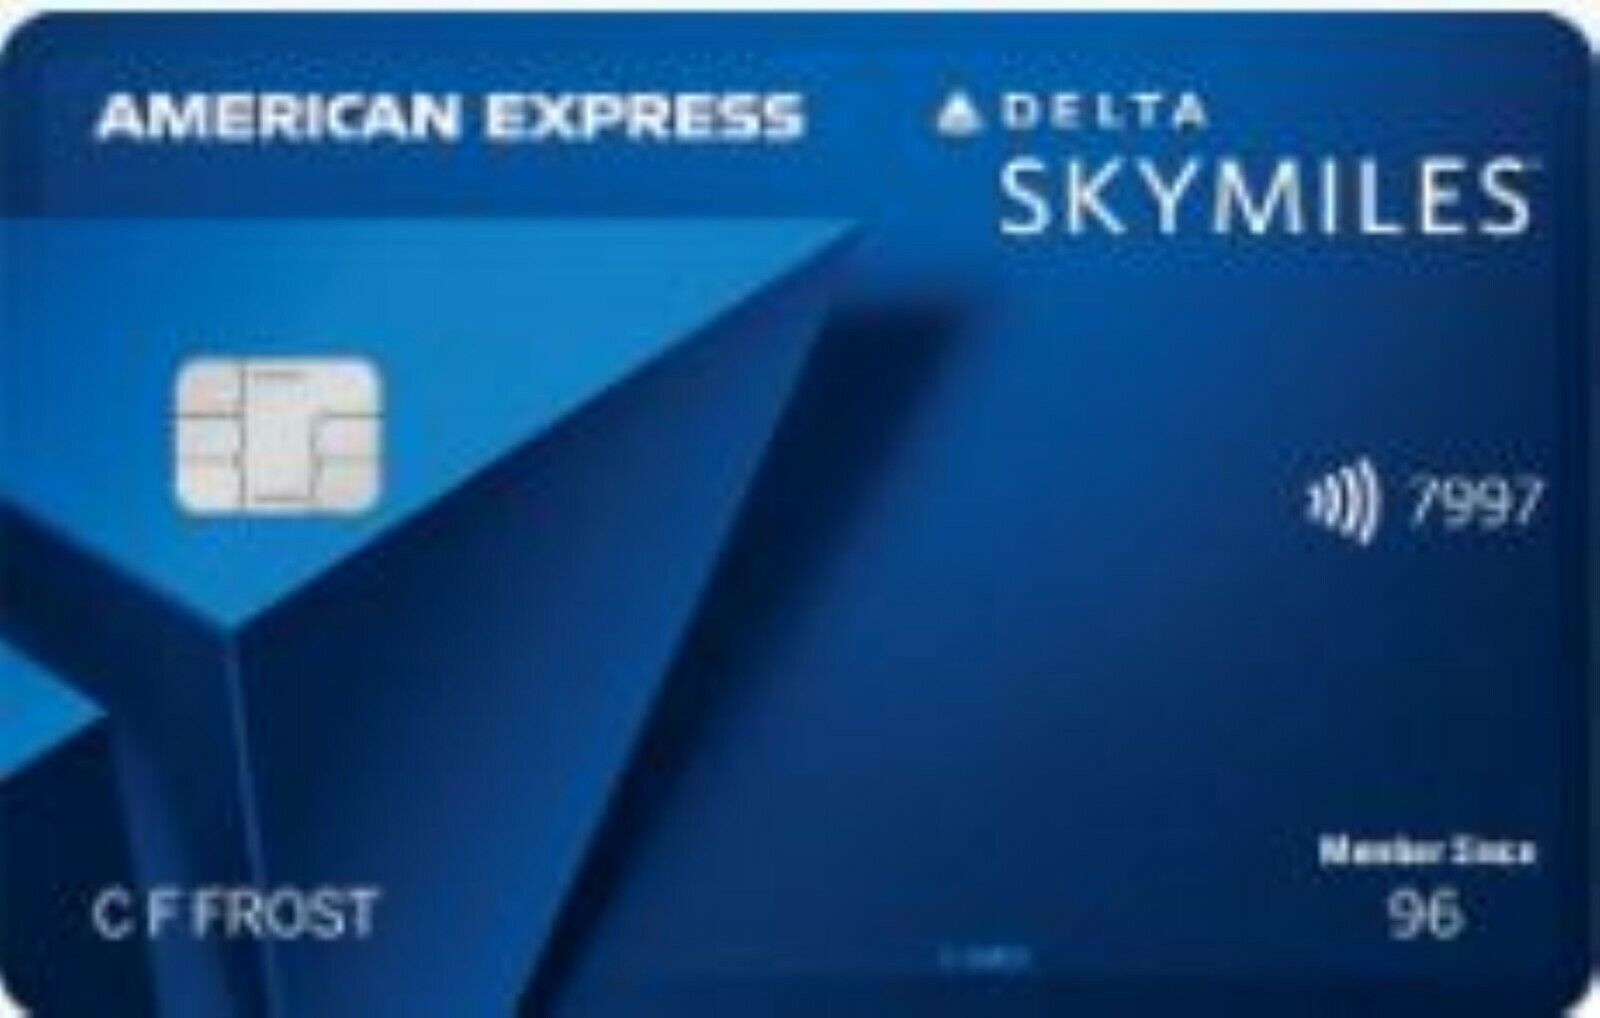 Delta Skymiles Blue Credit Card-  Get 10,000 miles + extra $5 - NO ANNUAL FEE